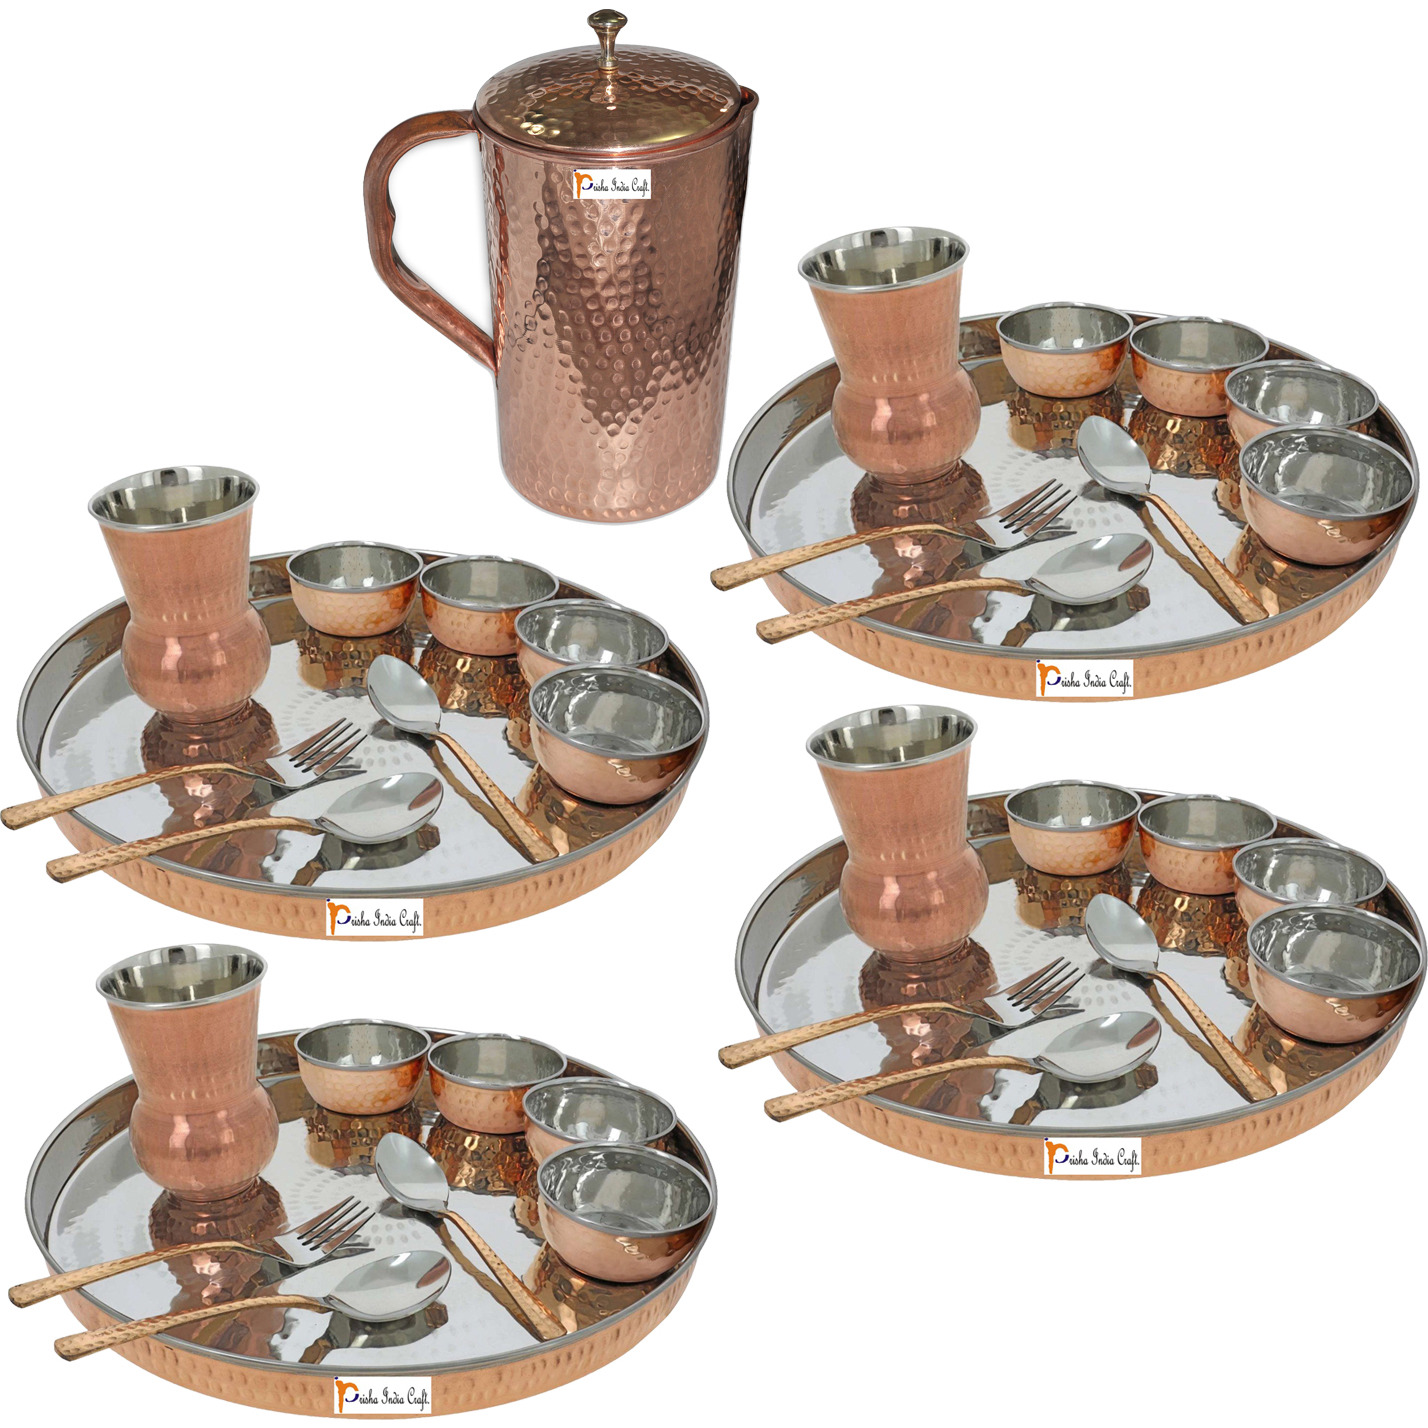 Prisha India Craft B. Set of 4 Dinnerware Traditional Stainless Steel Copper Dinner Set of Thali Plate, Bowls, Glass and Spoons, Dia 13  With 1 Pure Copper Hammered Pitcher Jug - Christmas Gift